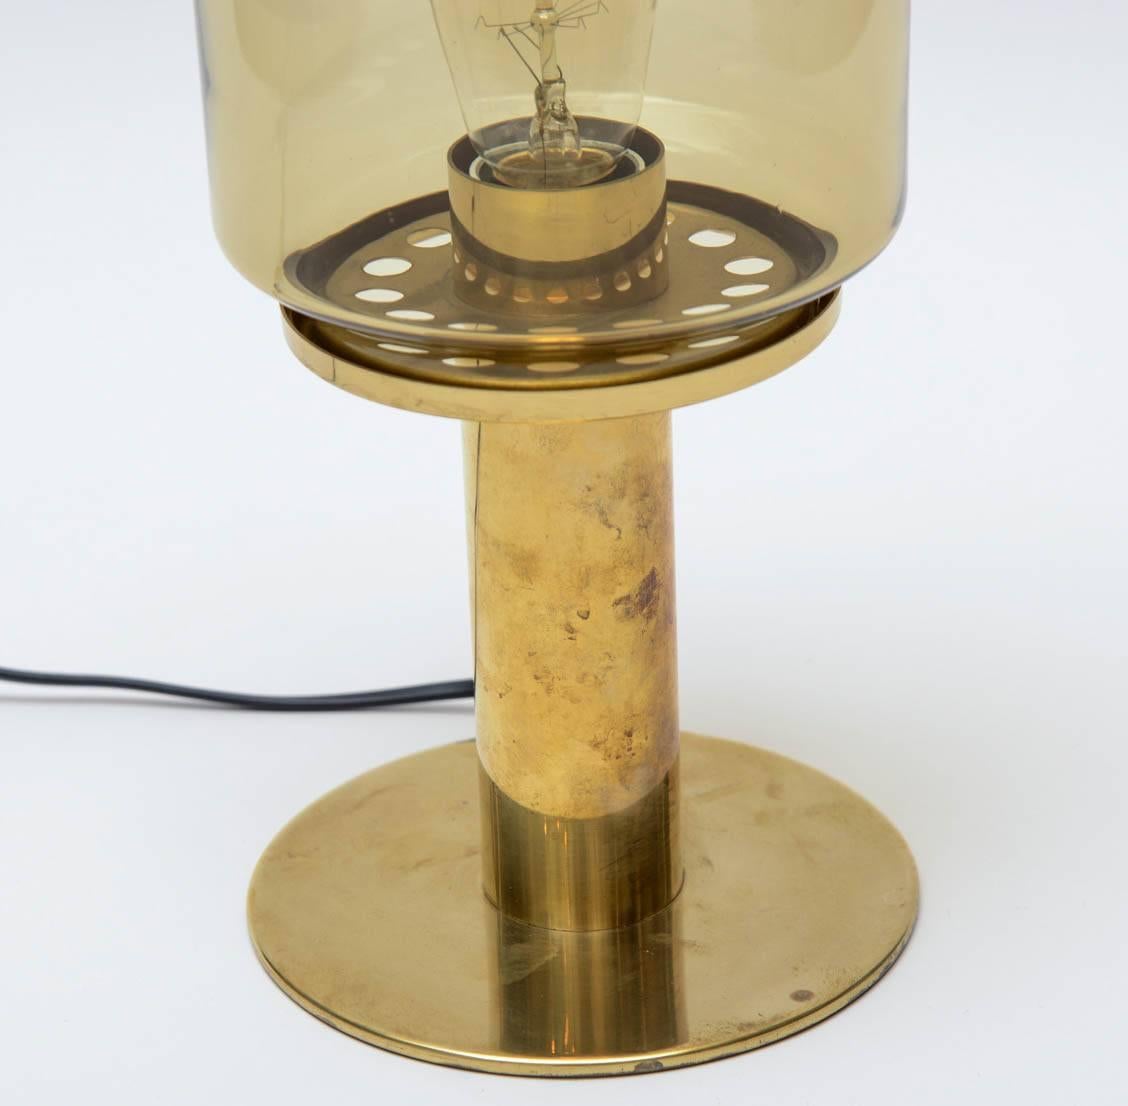 Pair of brass lamps with handblown smoked color glass shade designed by Hans-Agne Jakobsson and produced by his own company in Markaryd, Sweden. Model B102, original stickers at the bottom, new wiring.